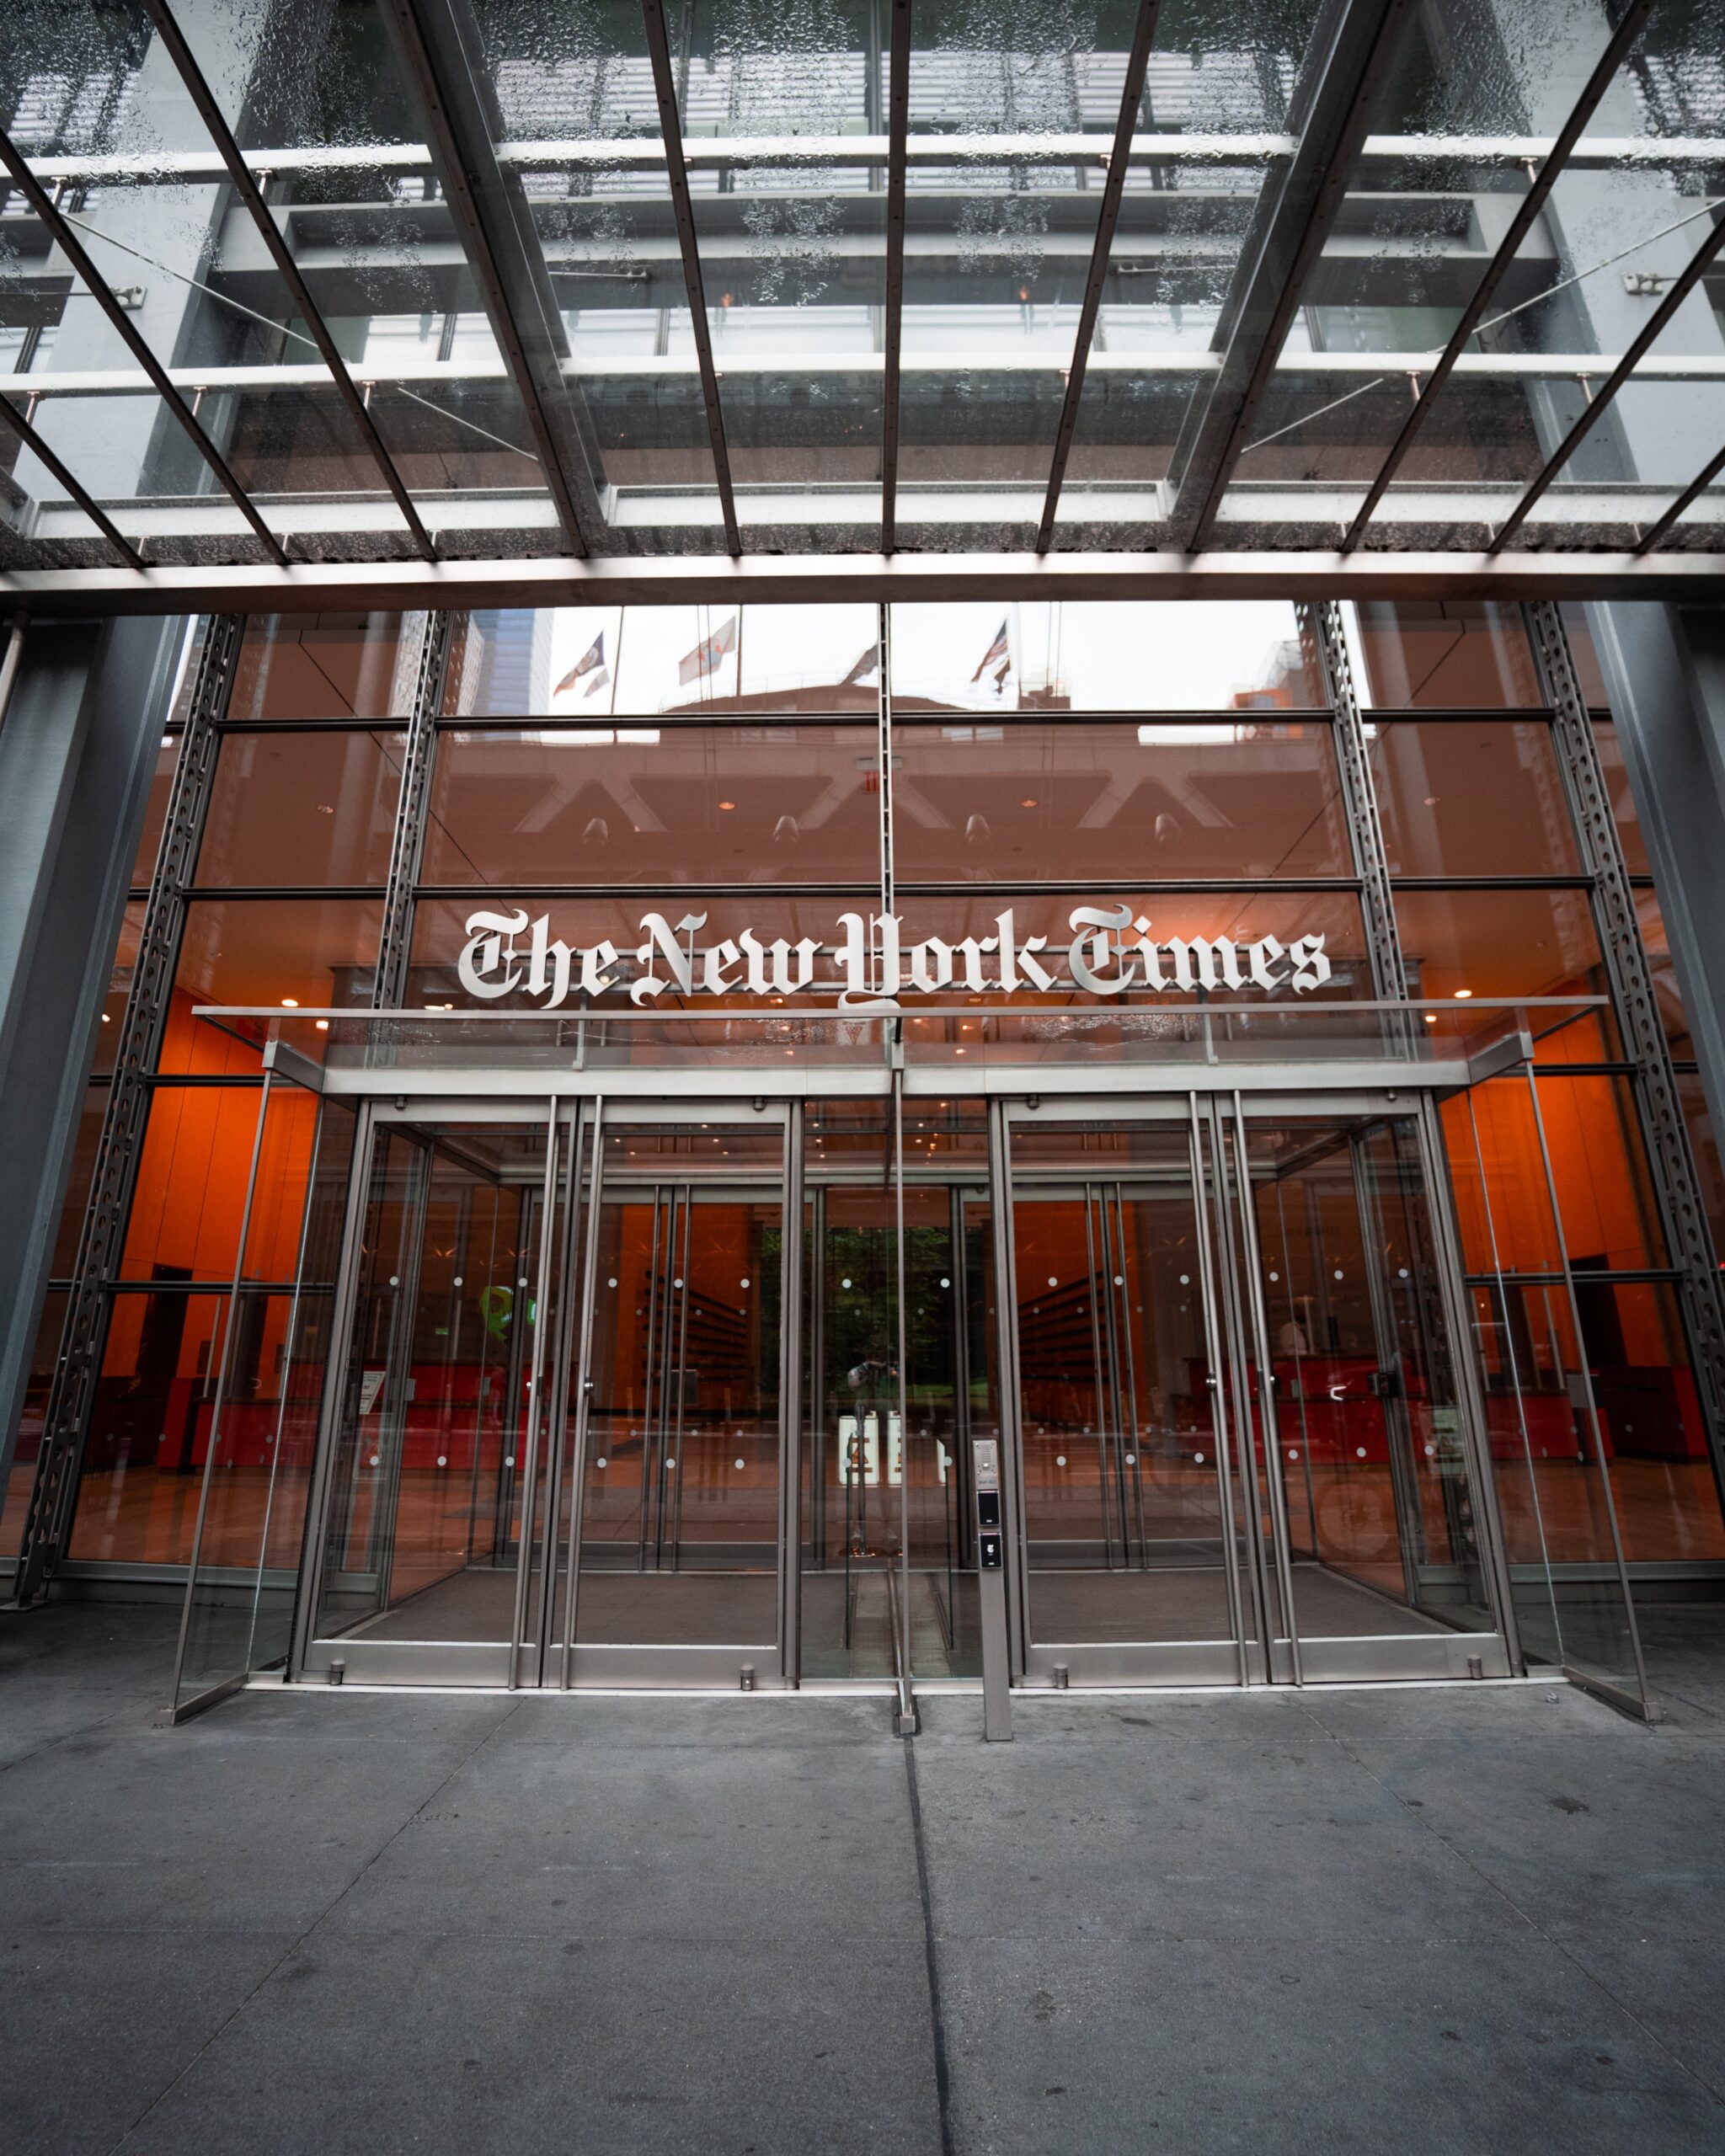 New York Times building image